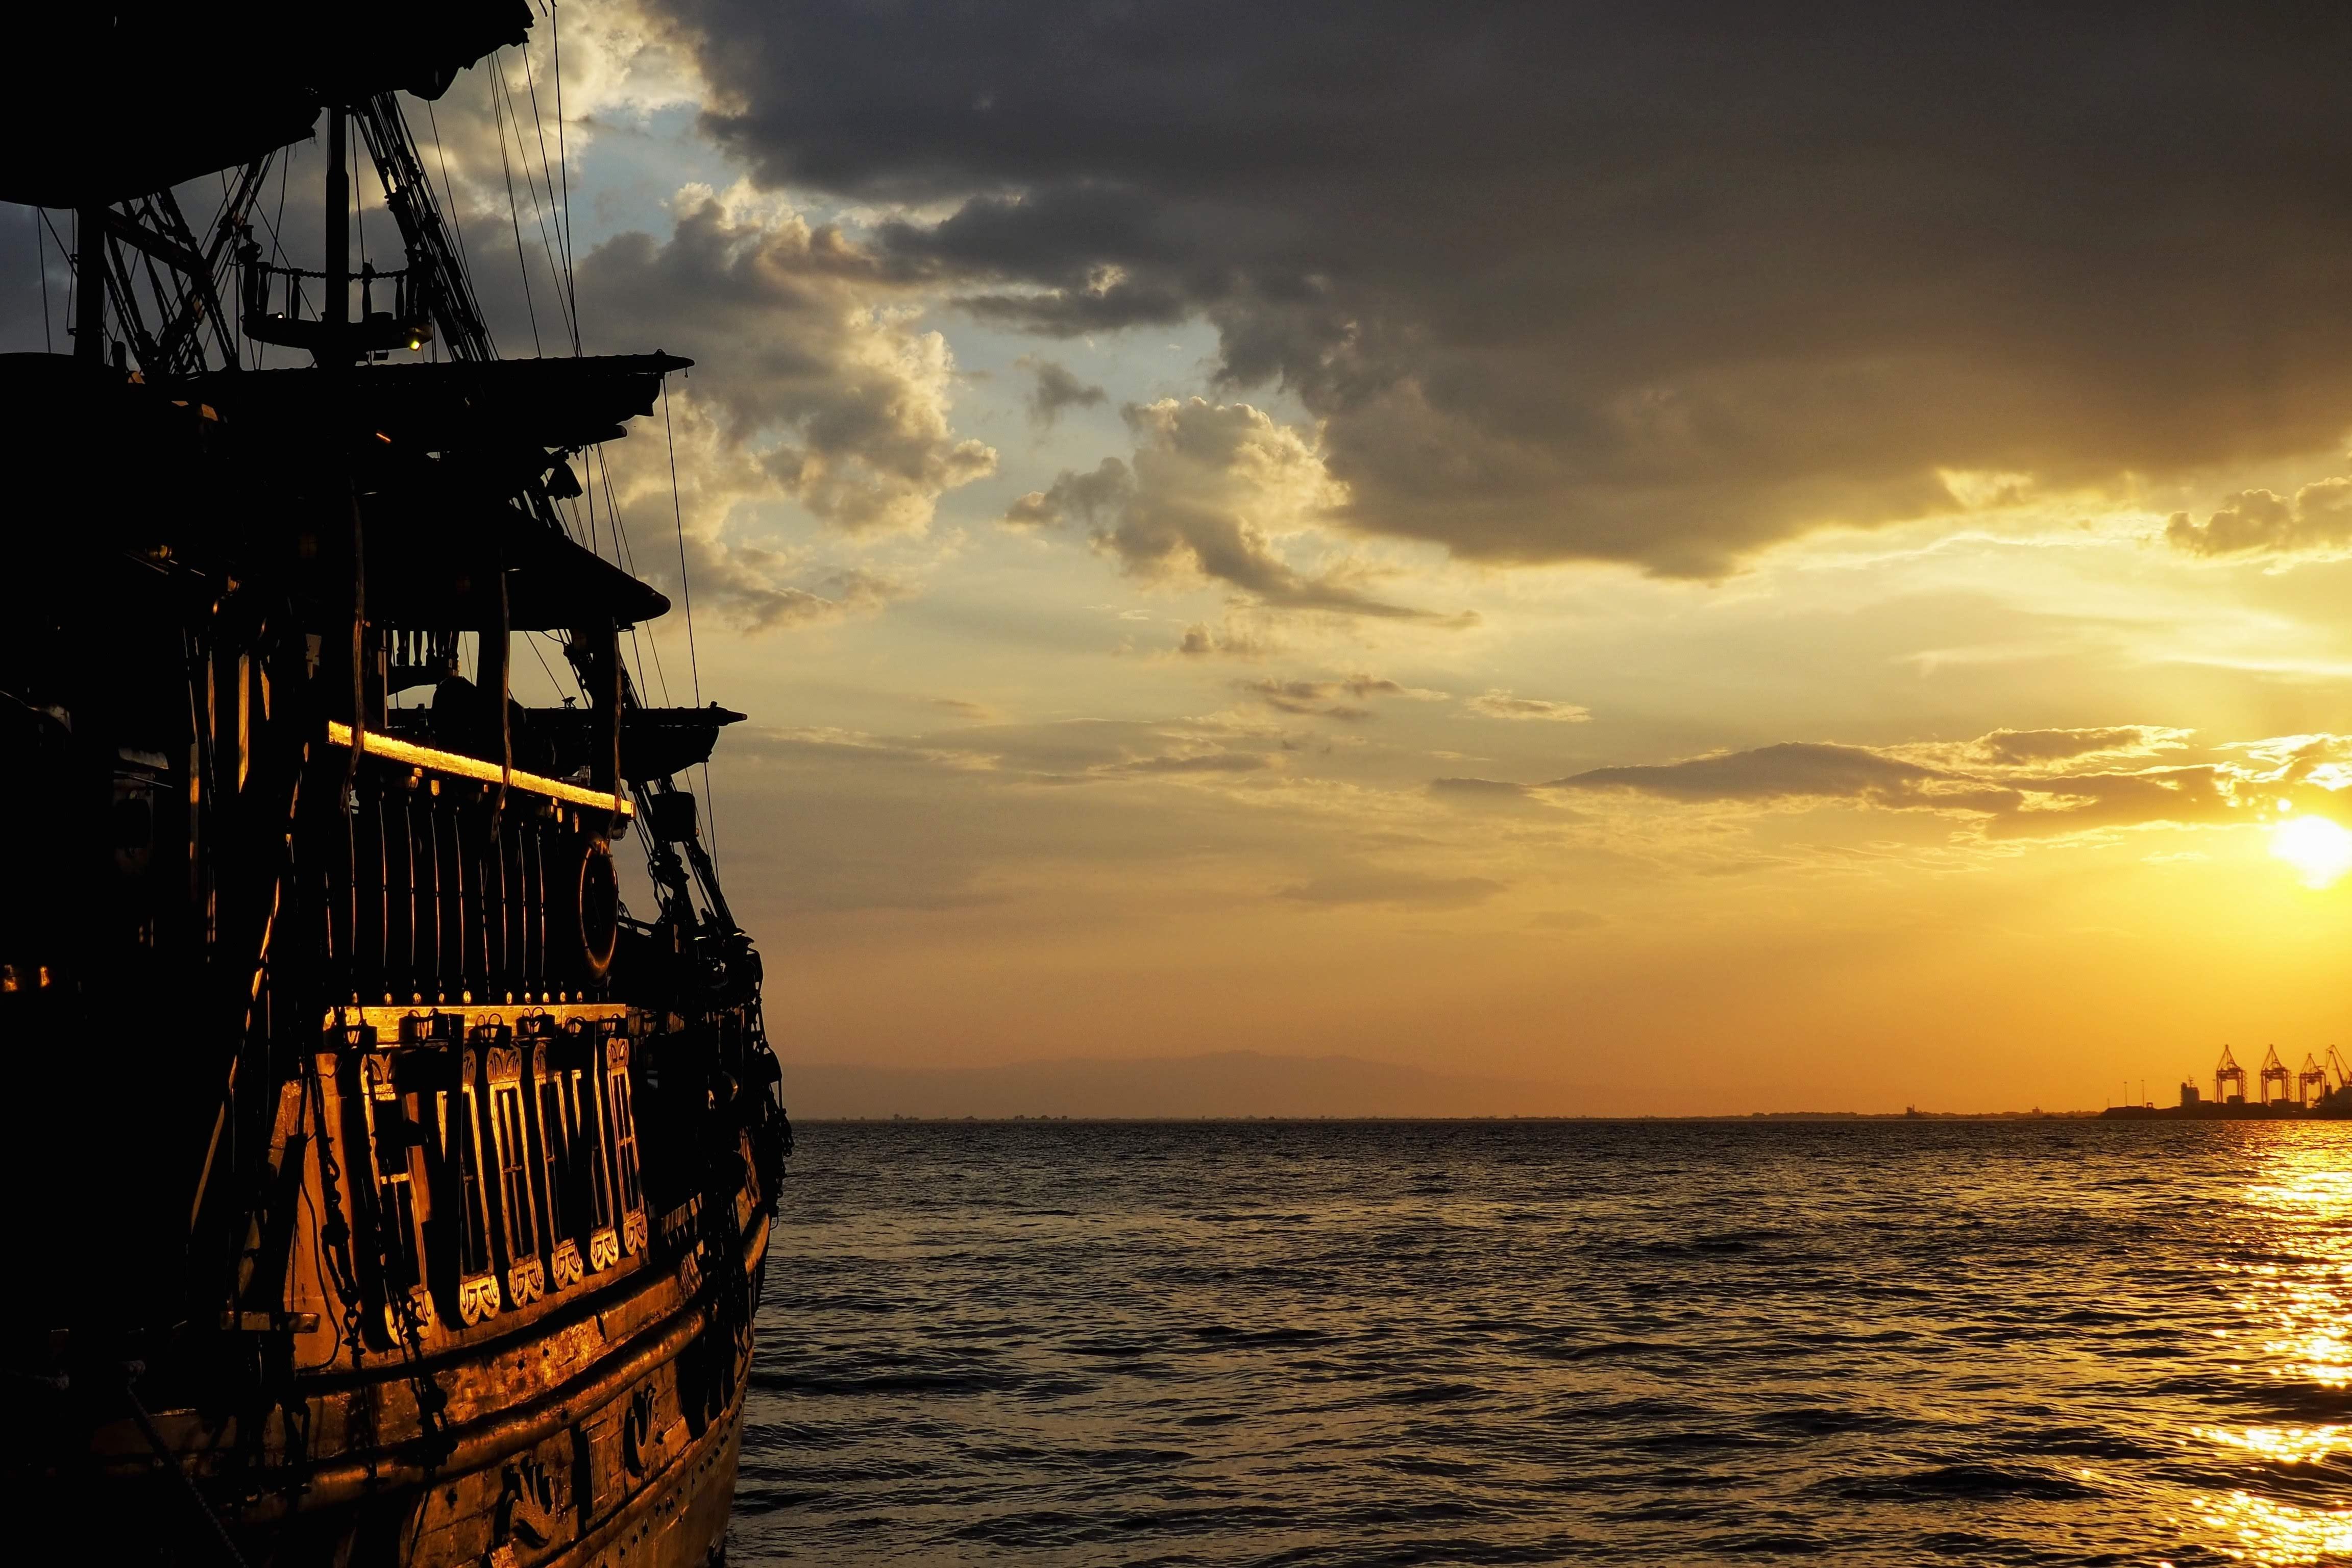 How Much Does It Cost To Build A Pirate Ship 